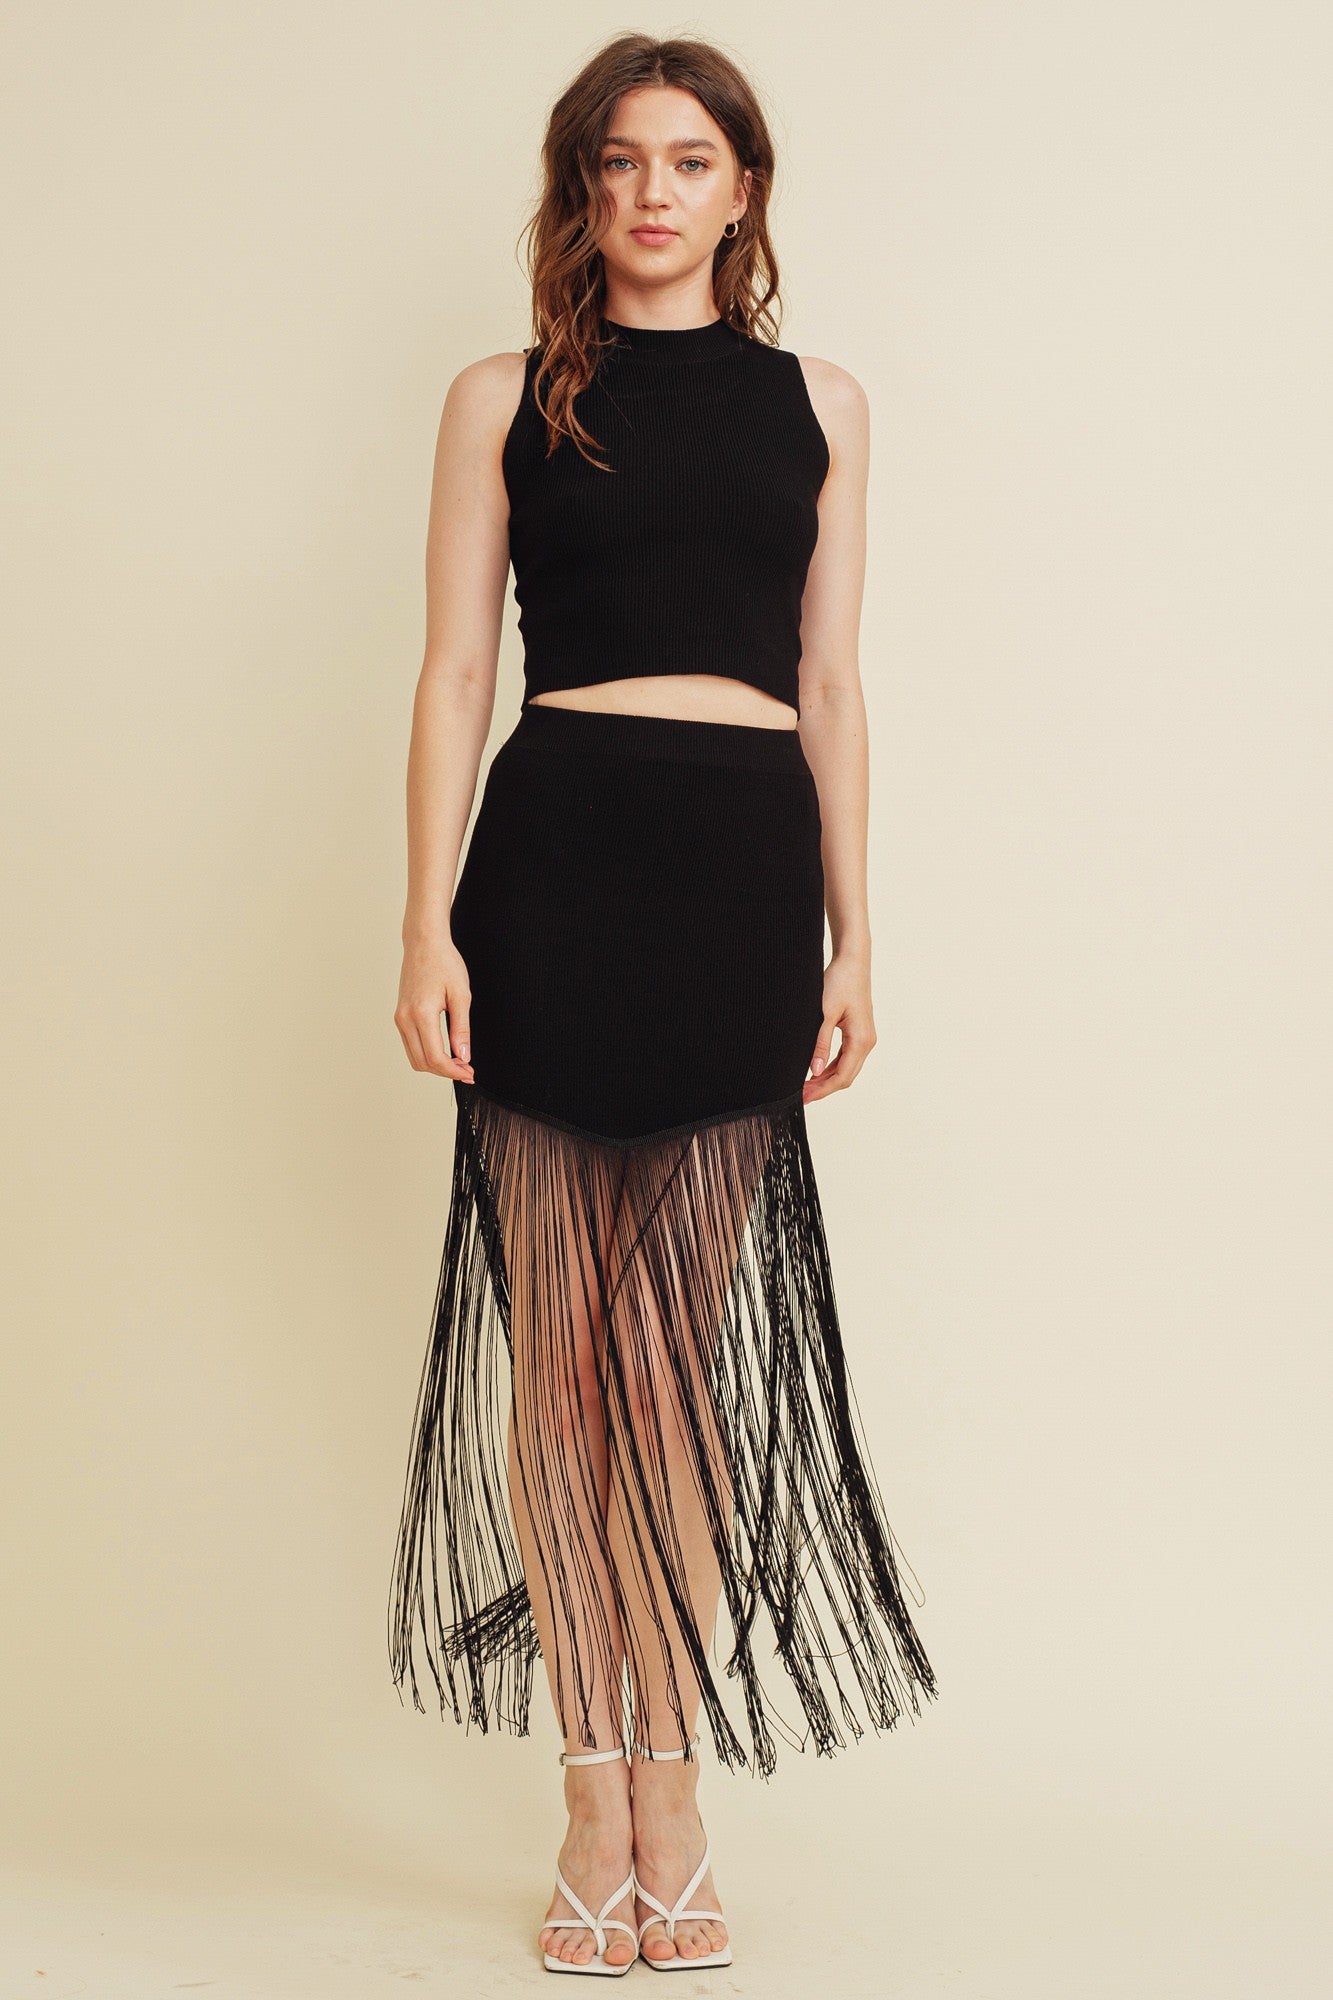 Sleeveless knit top and midi skirt in black with fringe detailing.  Front view.